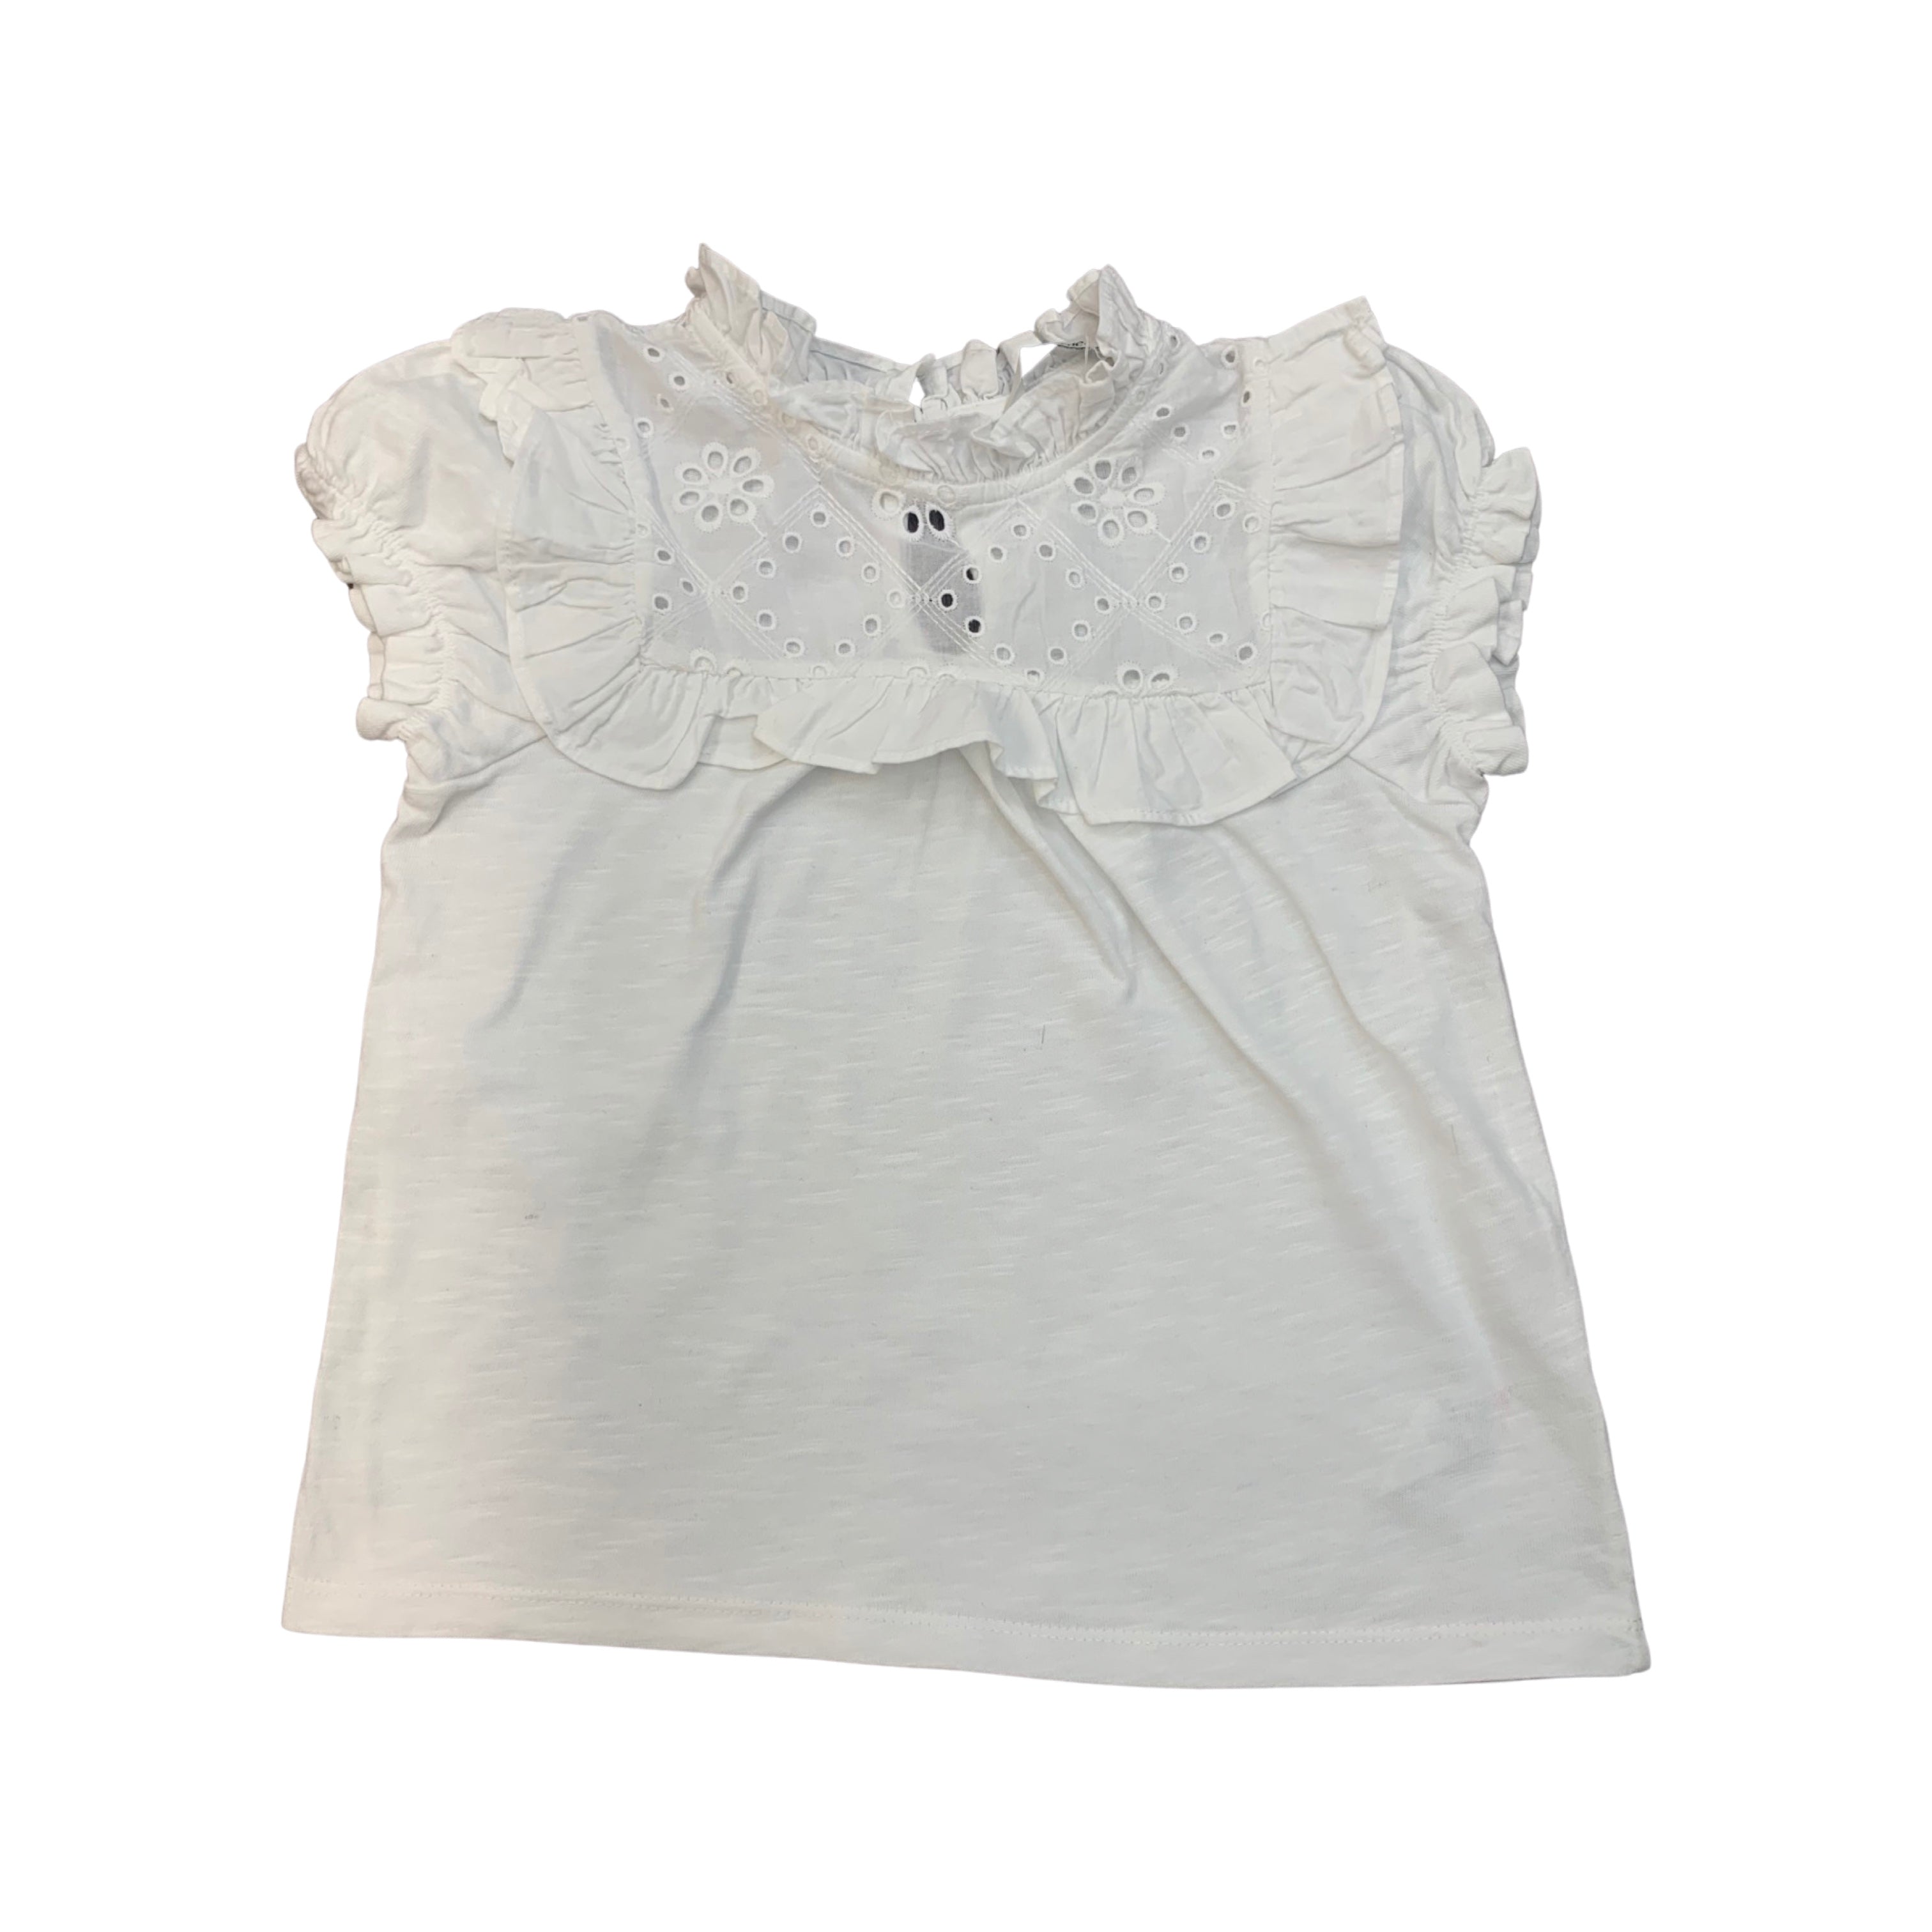 George Embroidered T Shirt Girls 7-8 Years